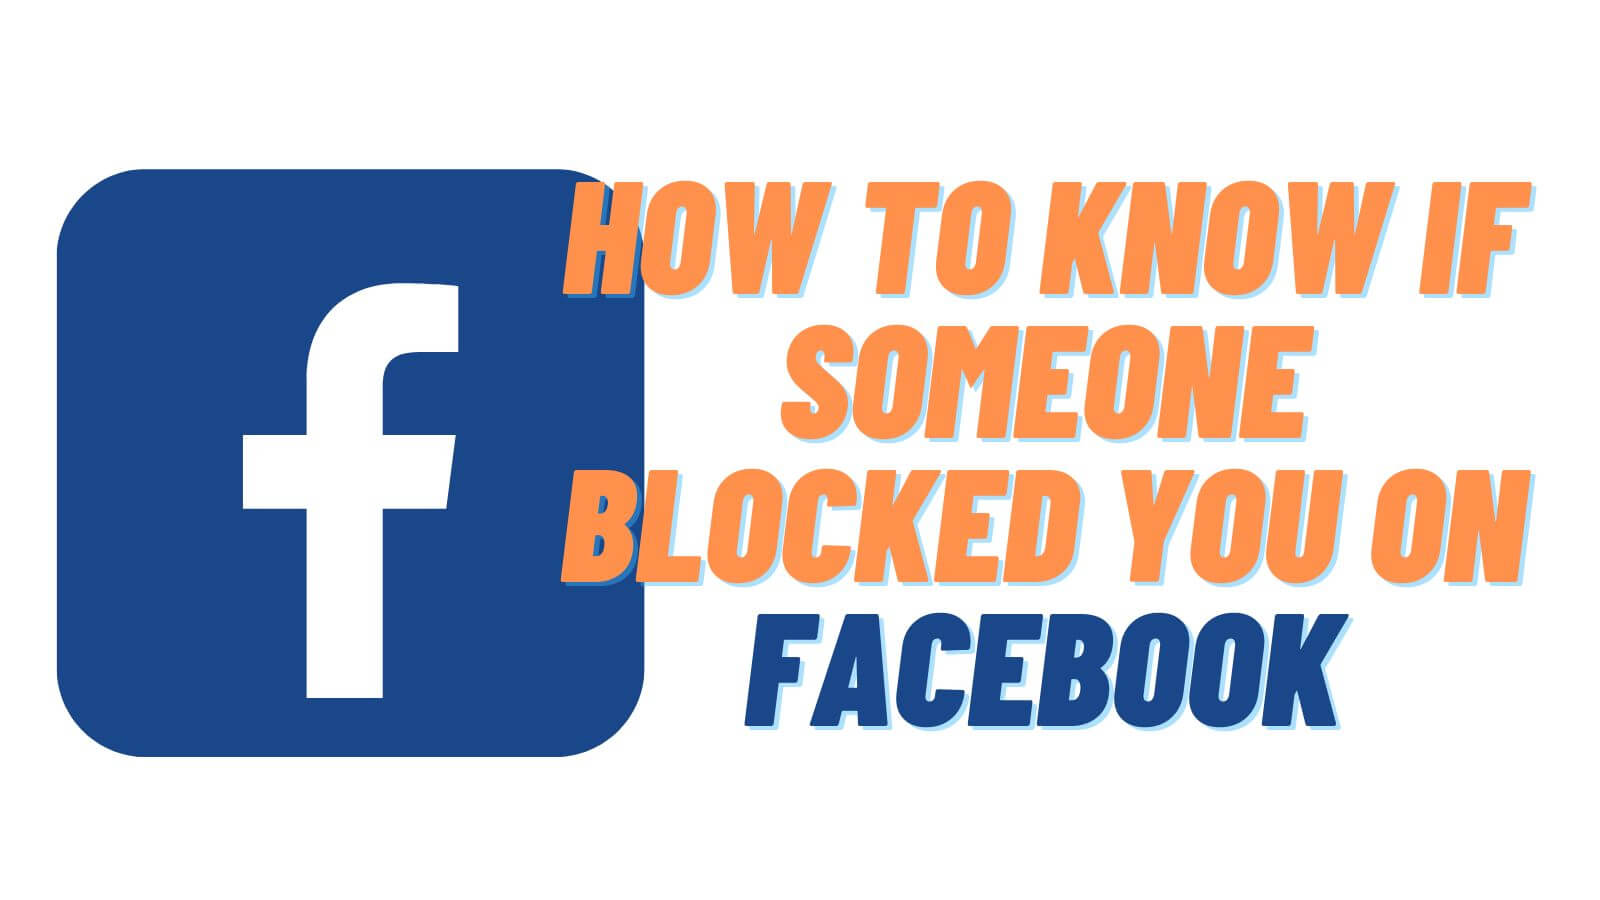 How to Know If Someone Blocked You on Facebook